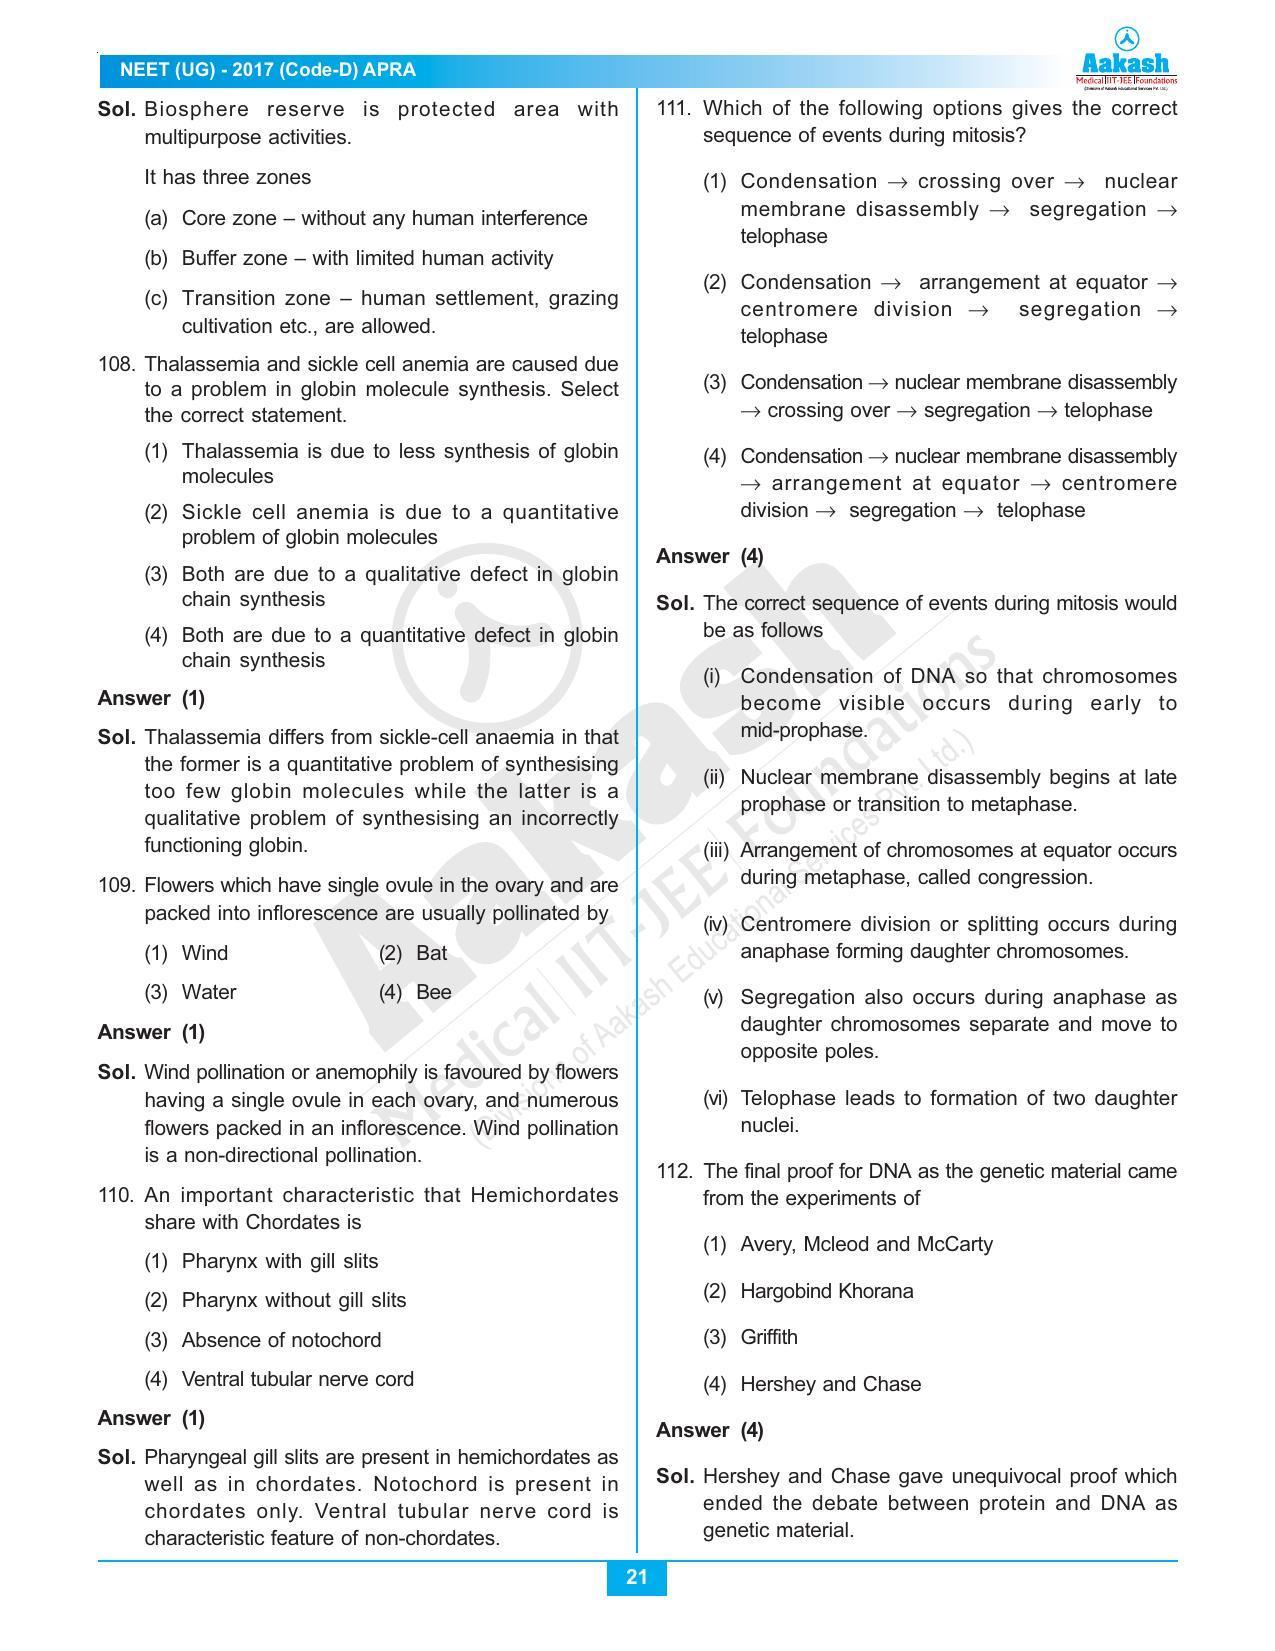  NEET Code D 2017 Answer & Solutions - Page 21